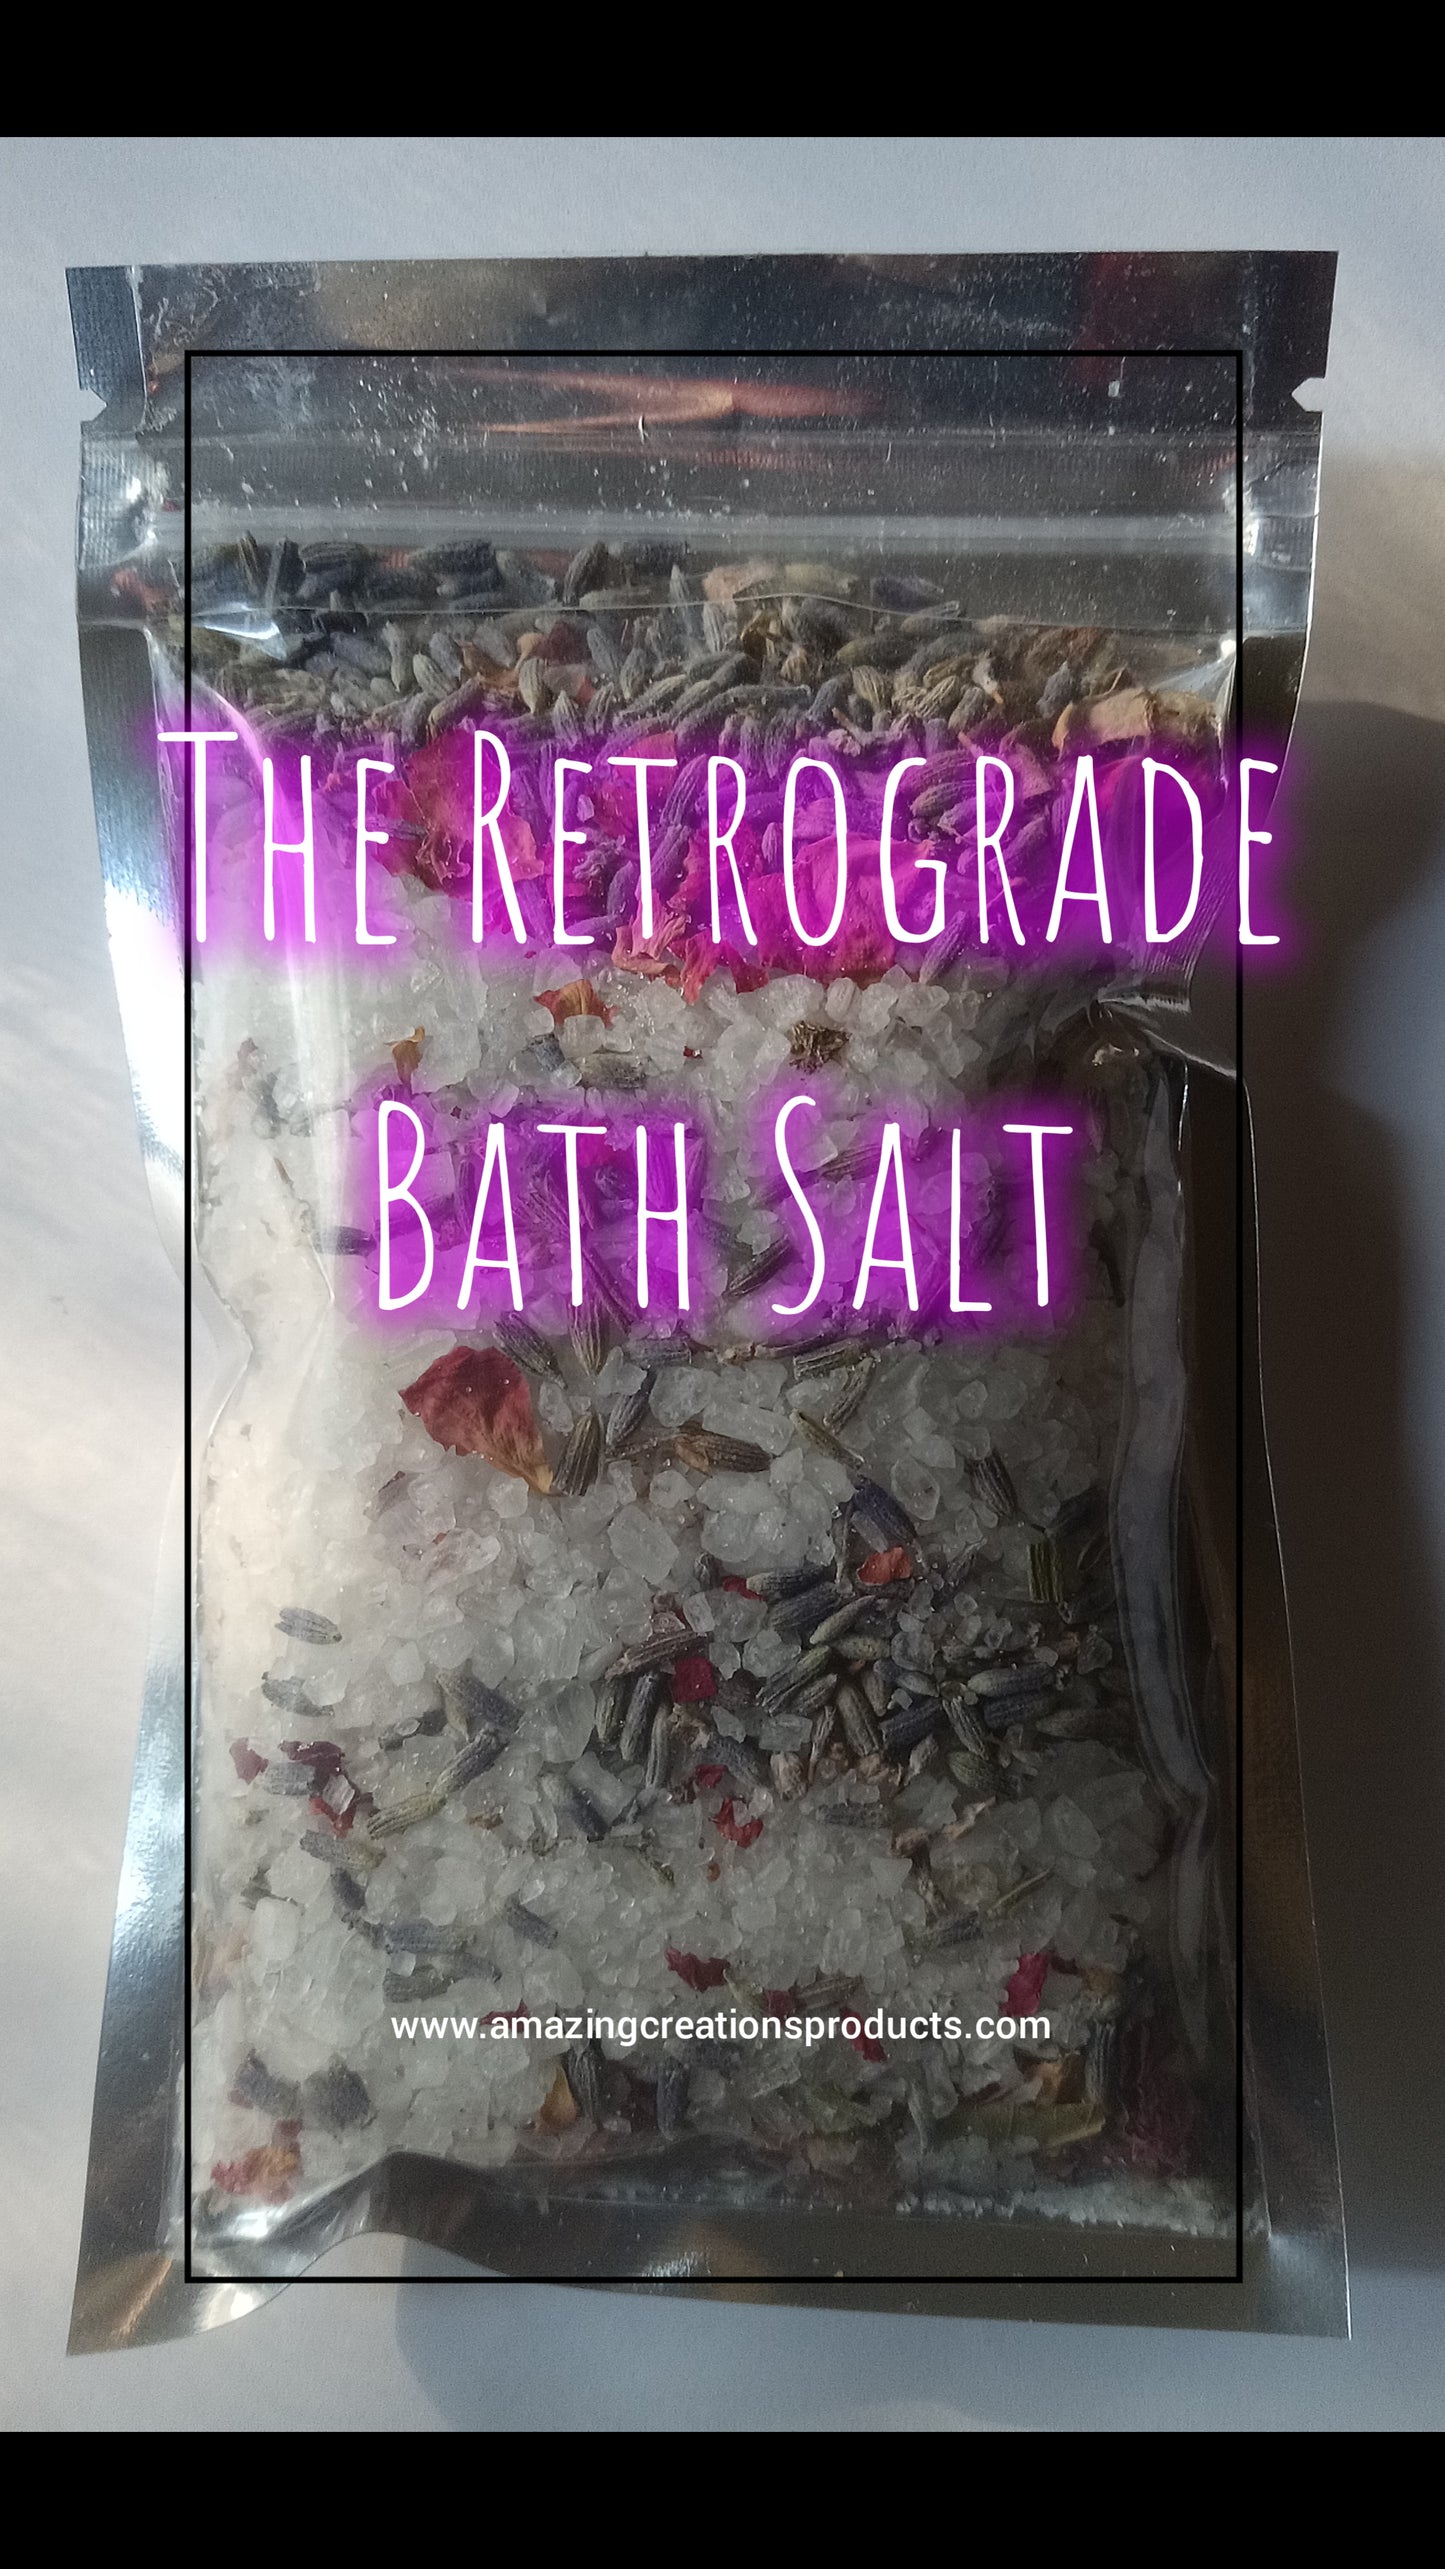  The Retrograde Bath Salt -  available at Amazing Creations Products . Grab yours for $13 today!